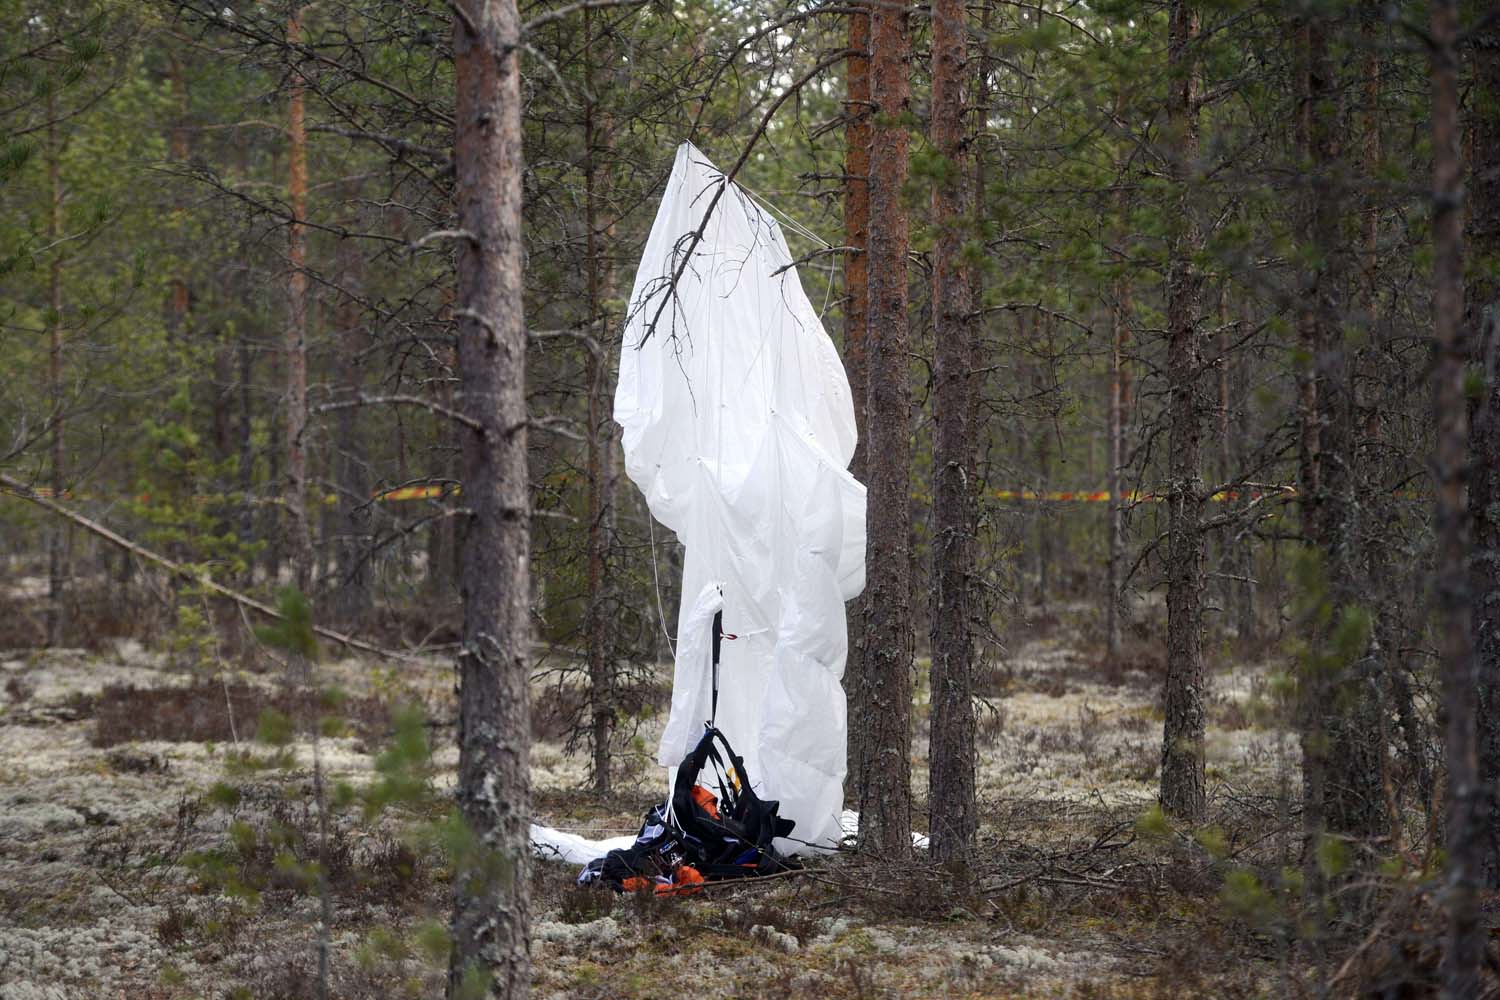 Apr. 21, 2014. A parachute hangs from a tree close to the wreckage of a small airplane in a forest next to an airfield in southwest Finland. The Comp Air 8 plane taking a group of skydivers for an Easter Day jump crashed on Easter Sunday, April 20, 2014, killing eight people, police said.